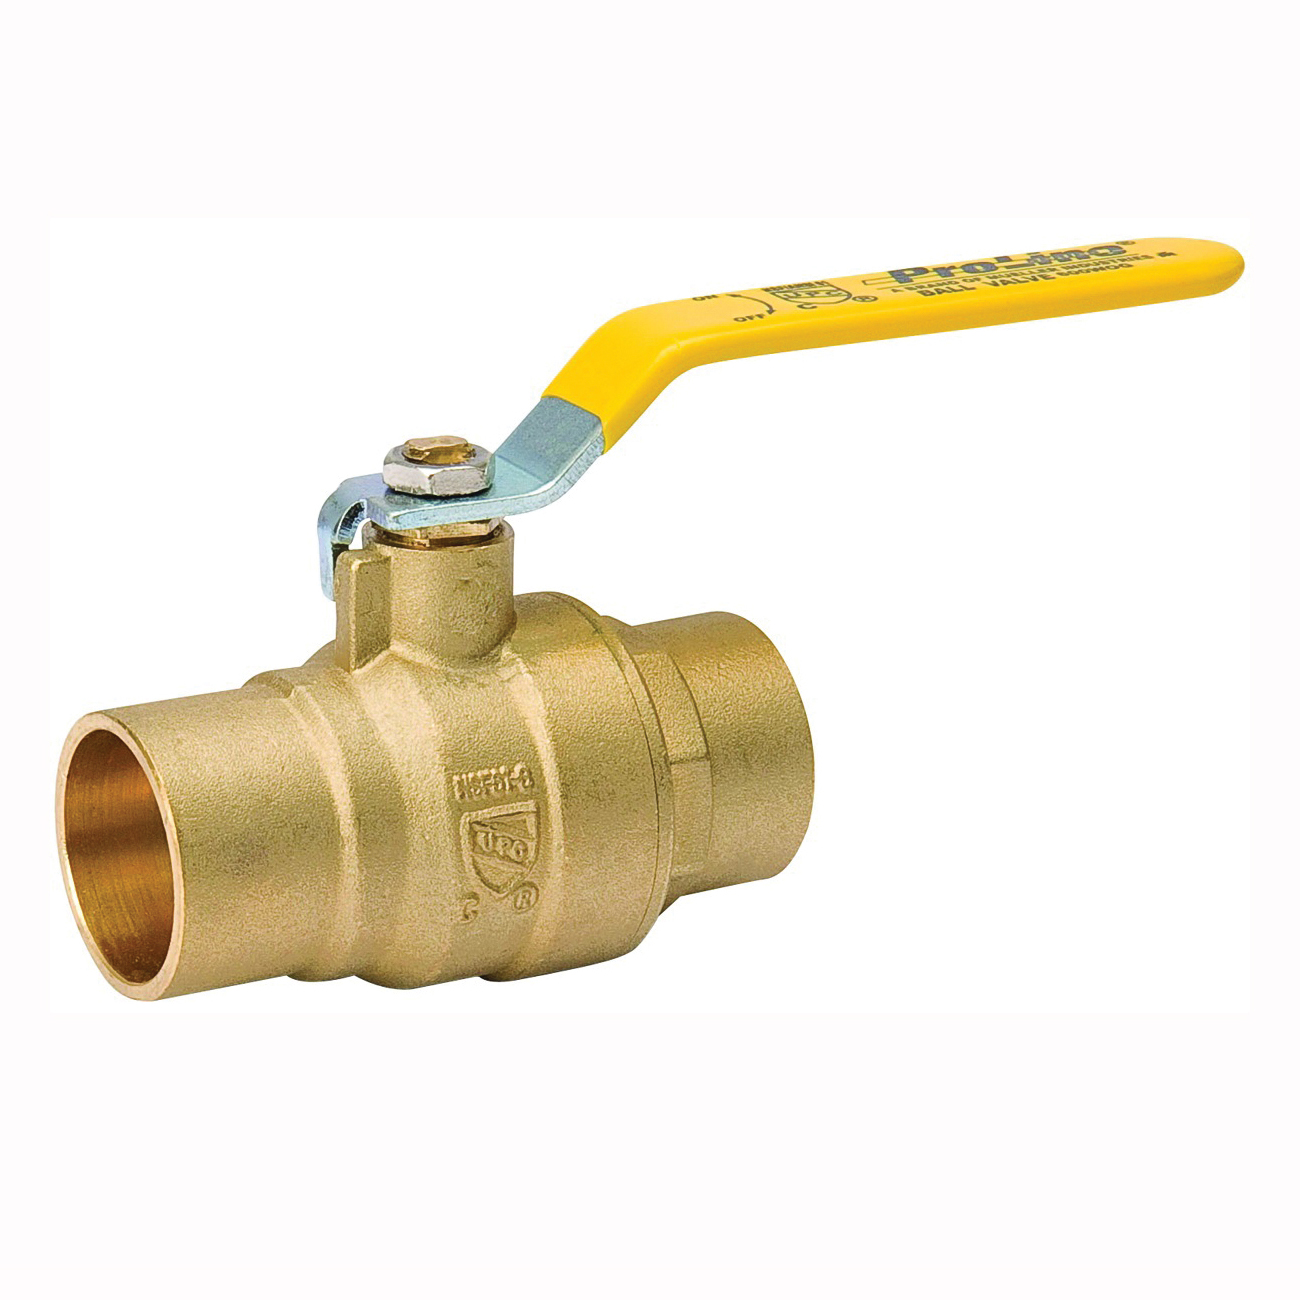 107-853NL Ball Valve, 1/2 in Connection, Sweat x Sweat, 600/125 psi Pressure, Standard Actuator, Brass Body